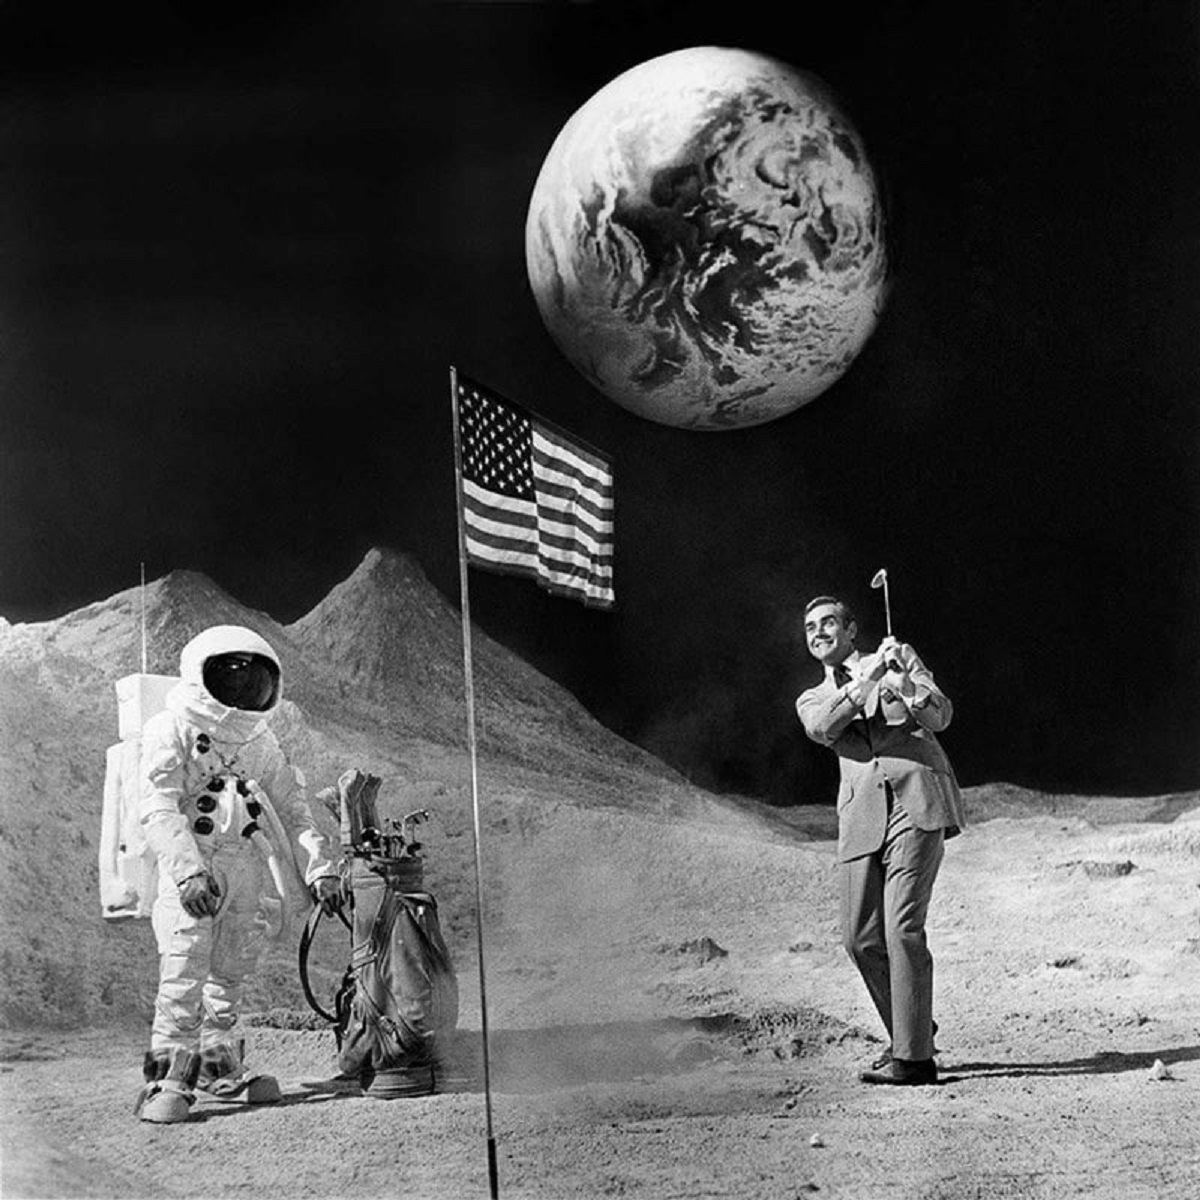 sean connery playing golf on the moon